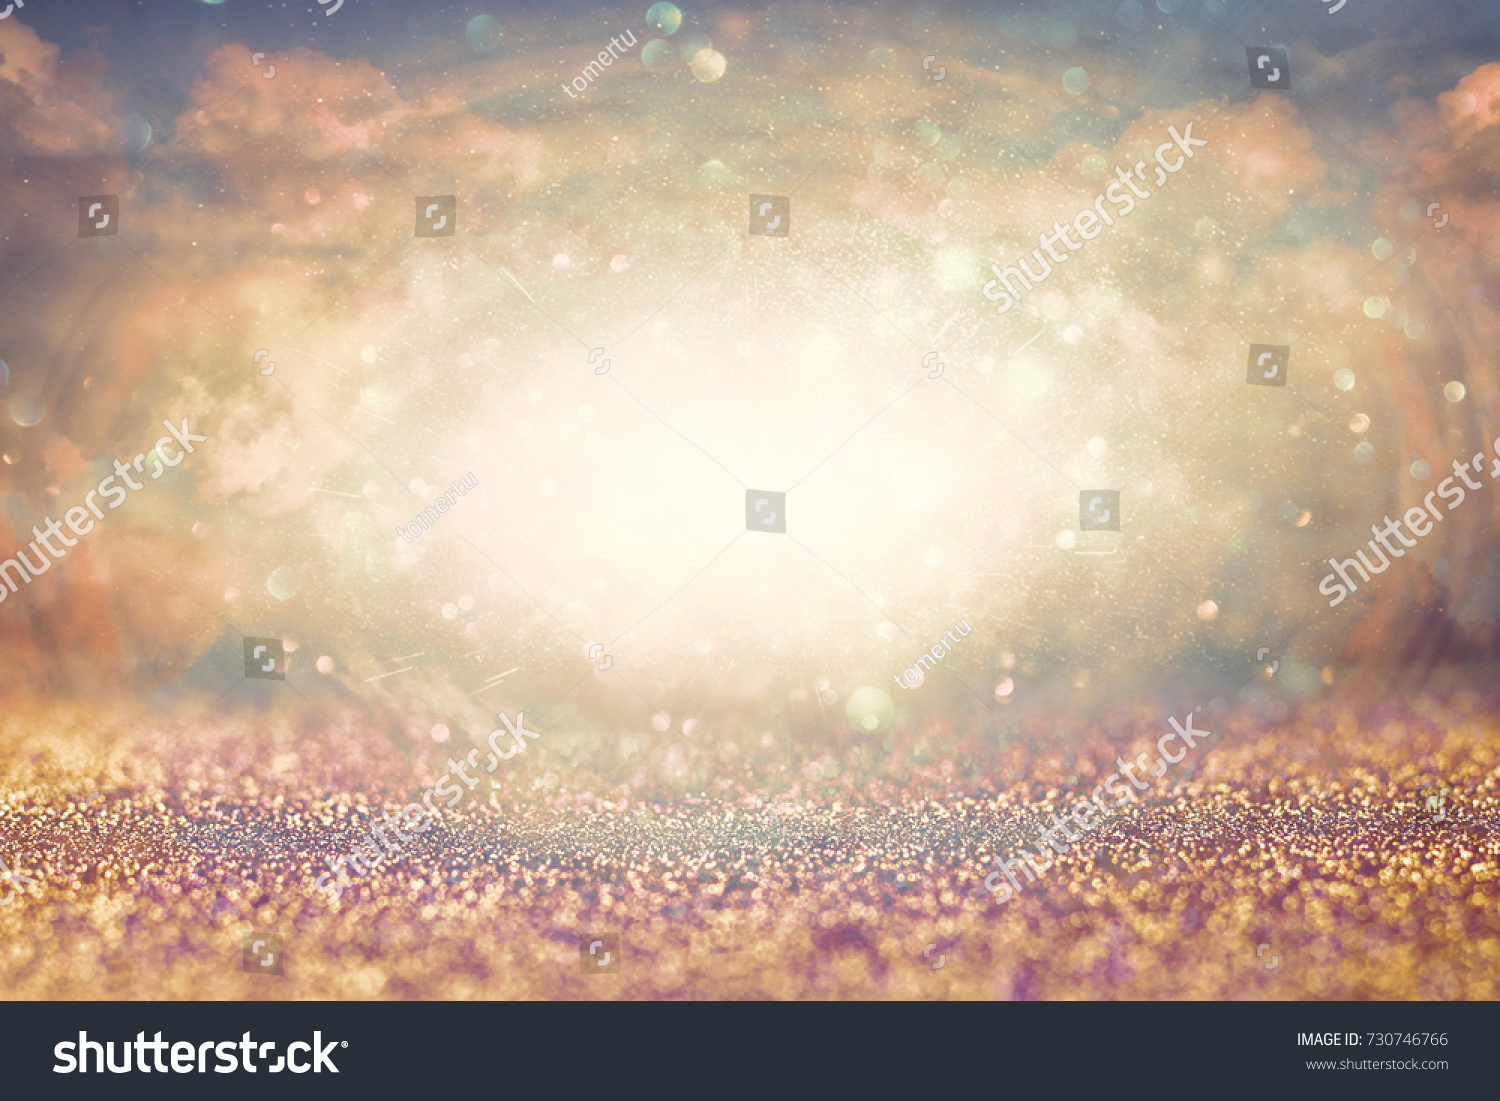 Abstract heavenly background with glitter. Revelation concept. #730746766